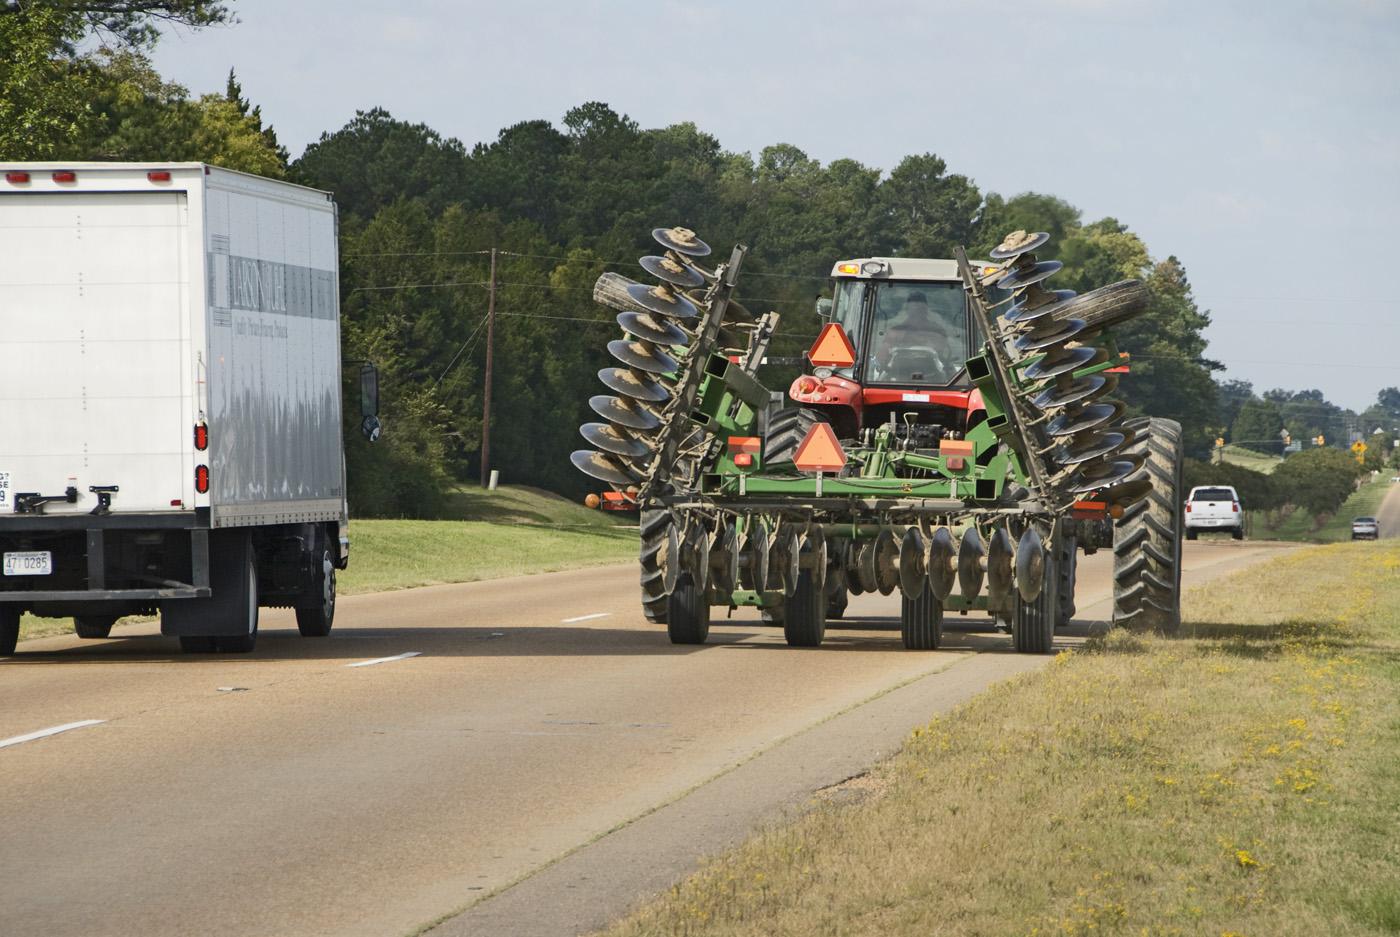 Photo by Marco Nicovich via Mississippi State University -- http://extension.msstate.edu/news/feature-story/2008/farm-machines-cars-share-fall-highways